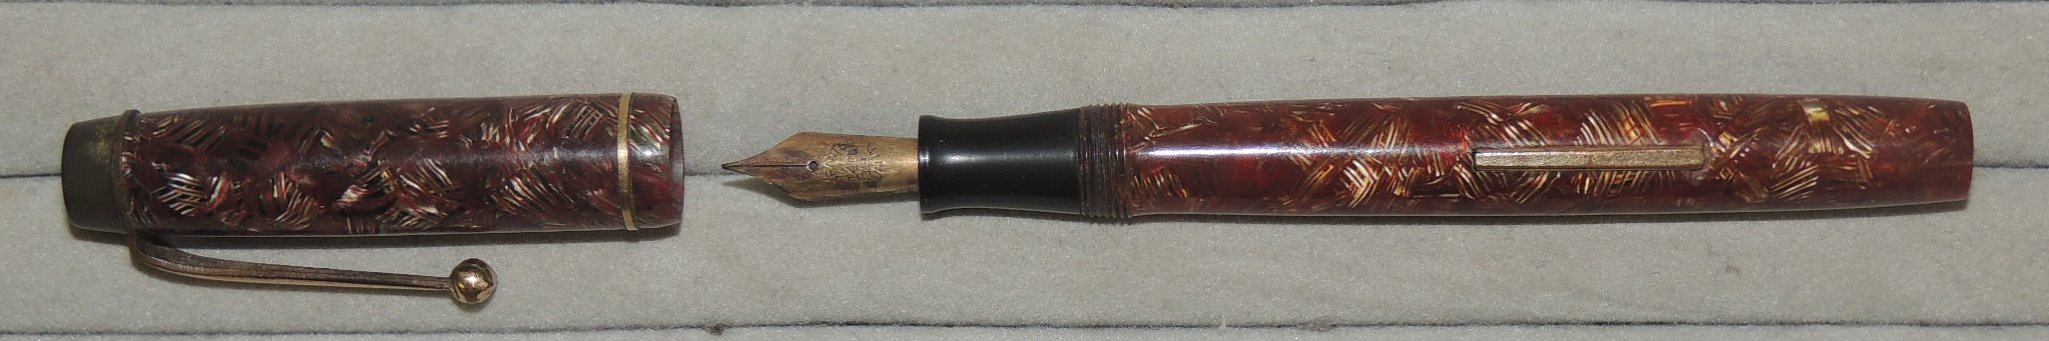 A Curzons Ltd "Summit" fountain pen on red/gold casing, side filler lever ++used but no damage